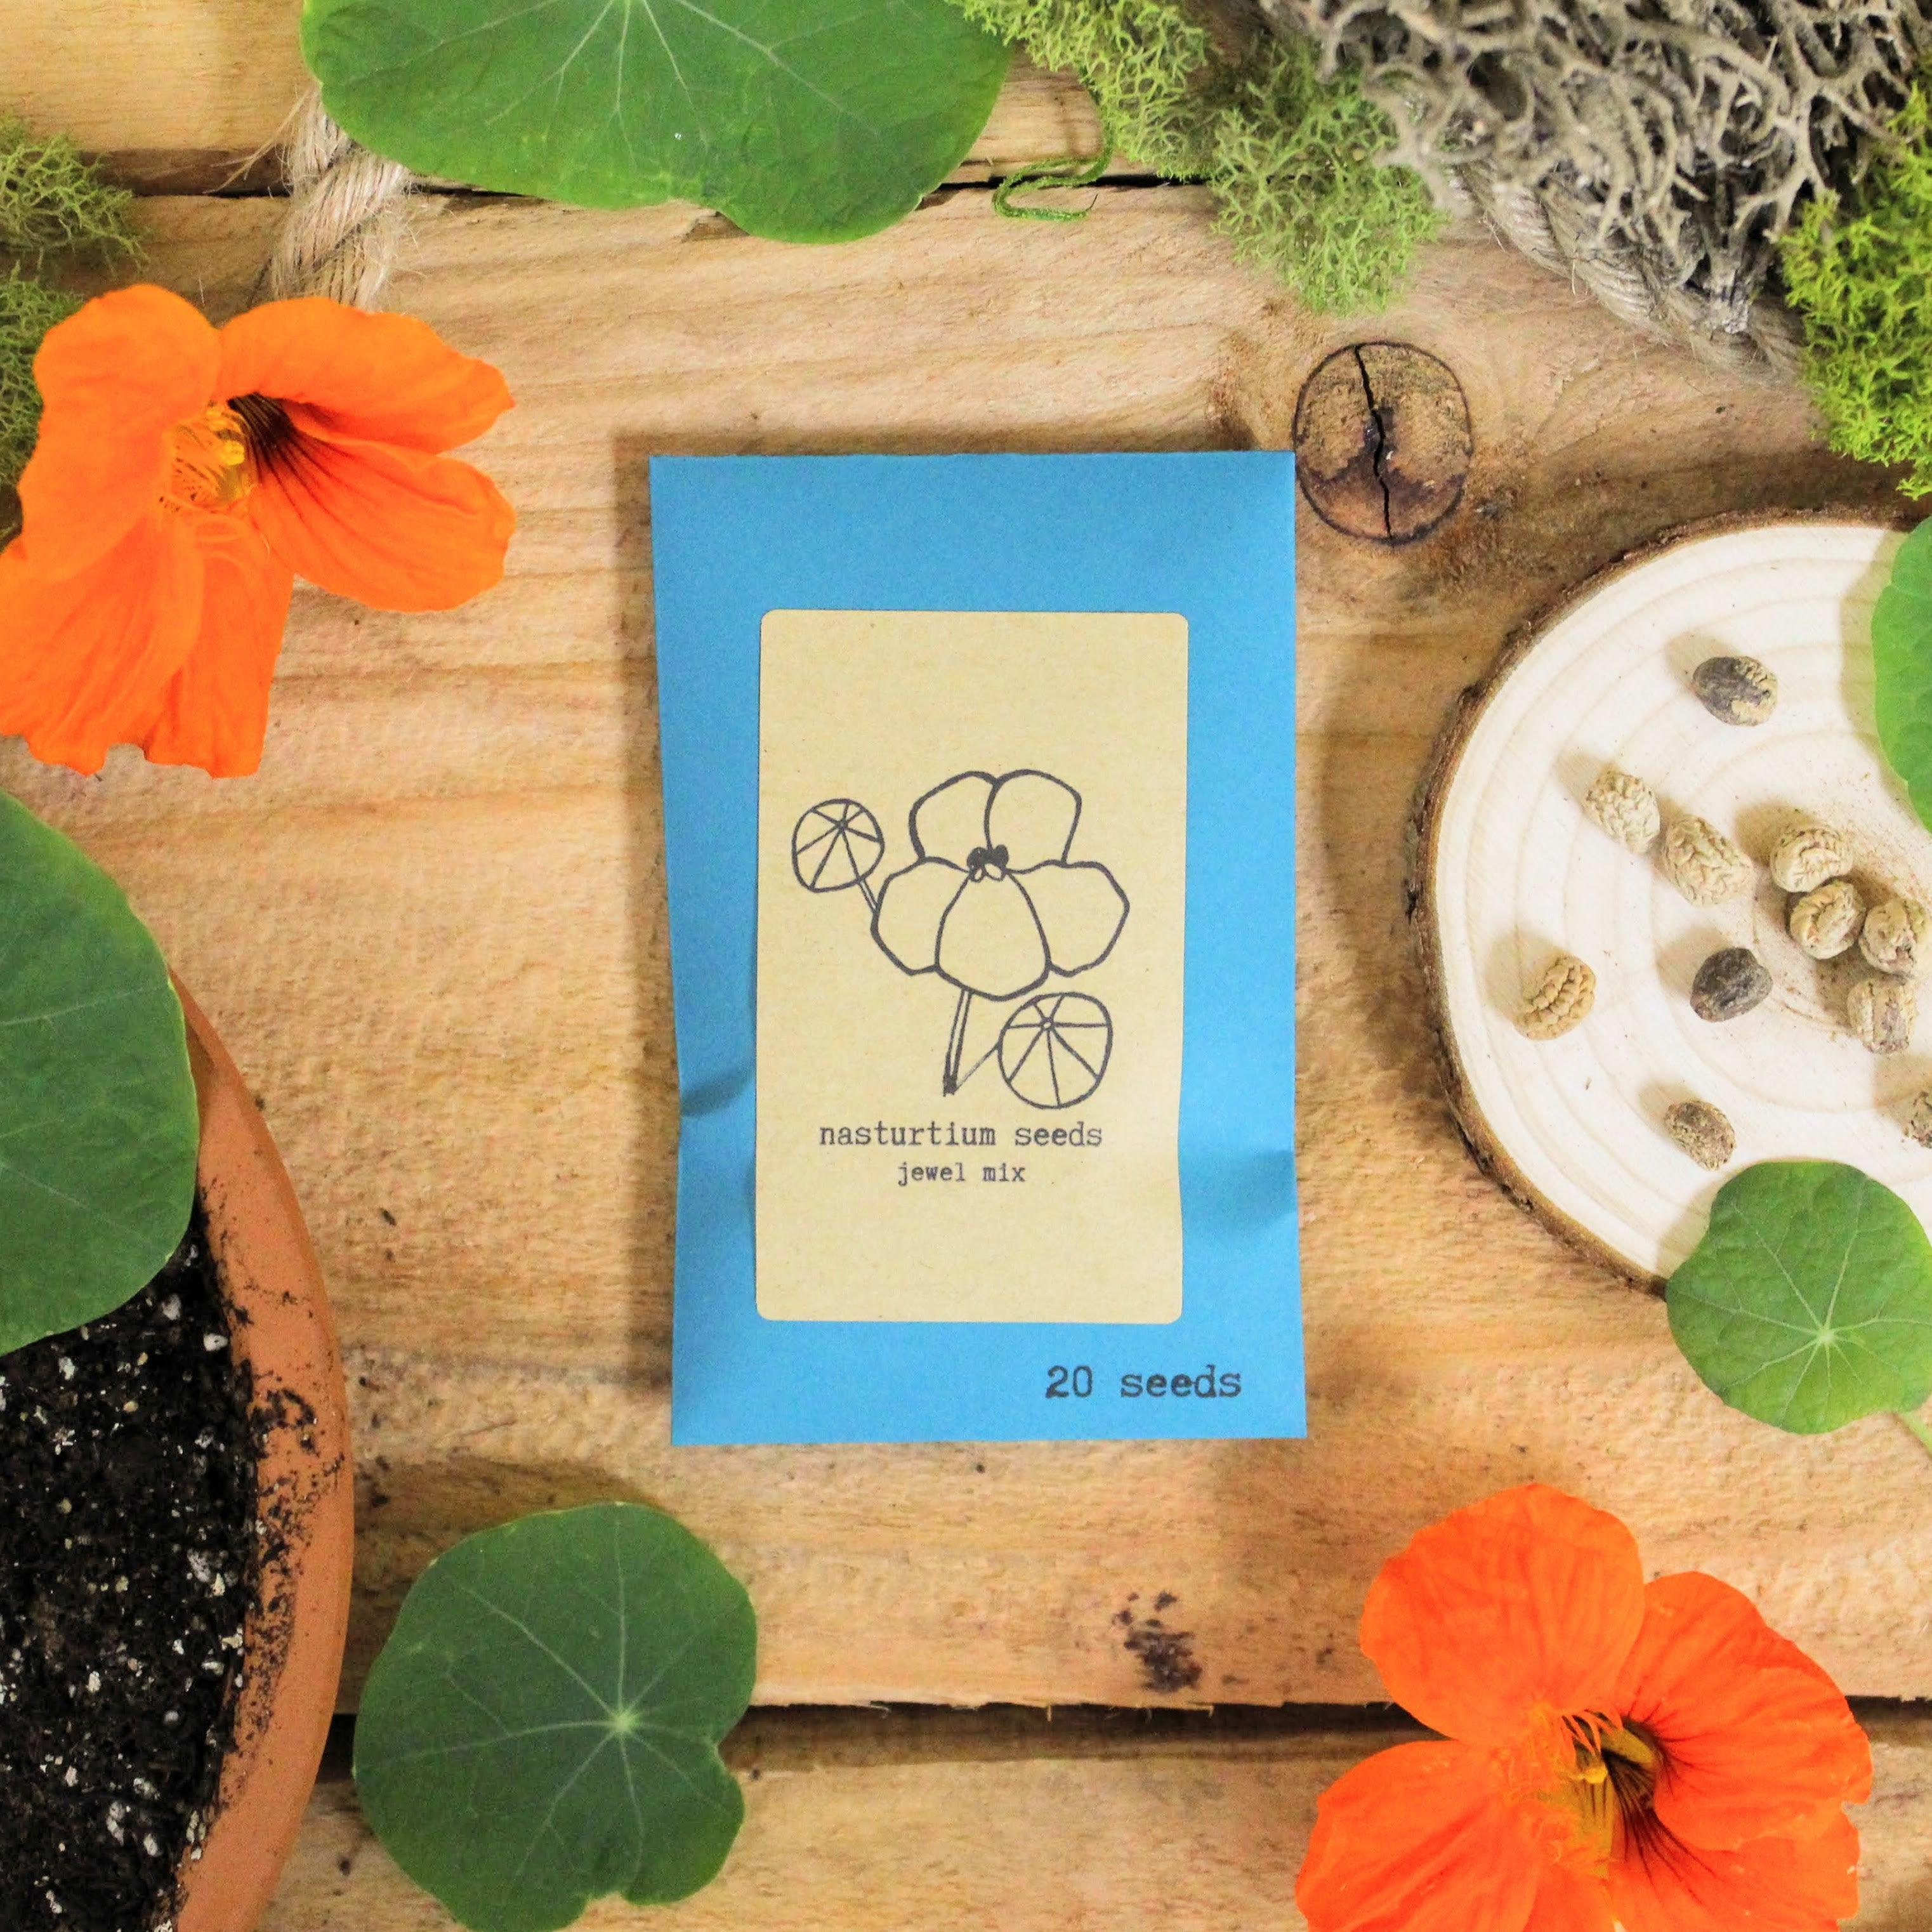 Shop for seed sets by Own Grown online at Bloomling International!